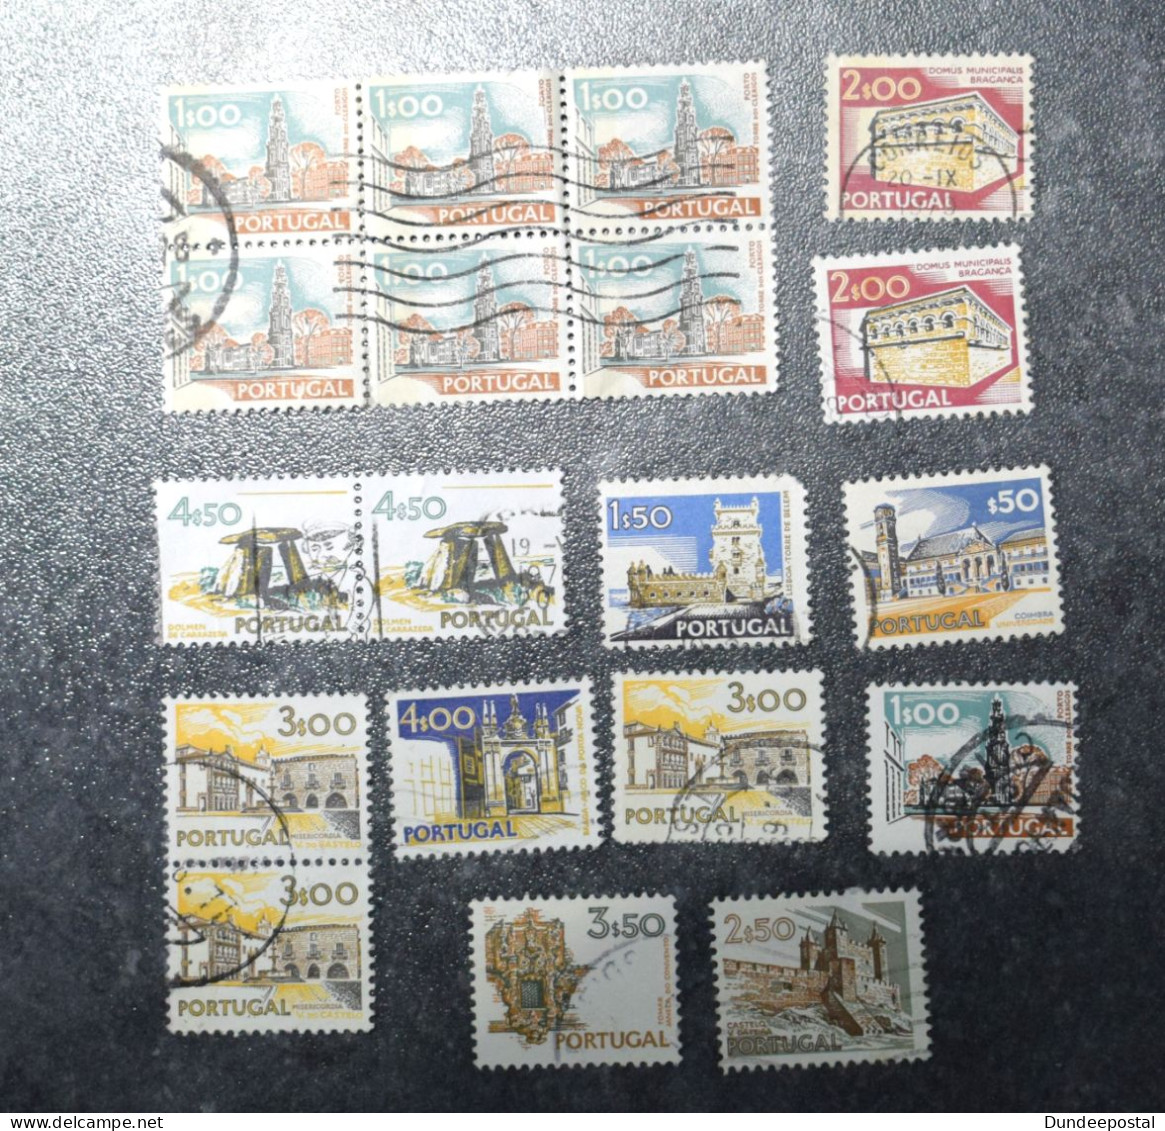 PORTUGAL STAMPS  Portugal Cities And Landscapes  1953 ~~L@@K~~ - Usati